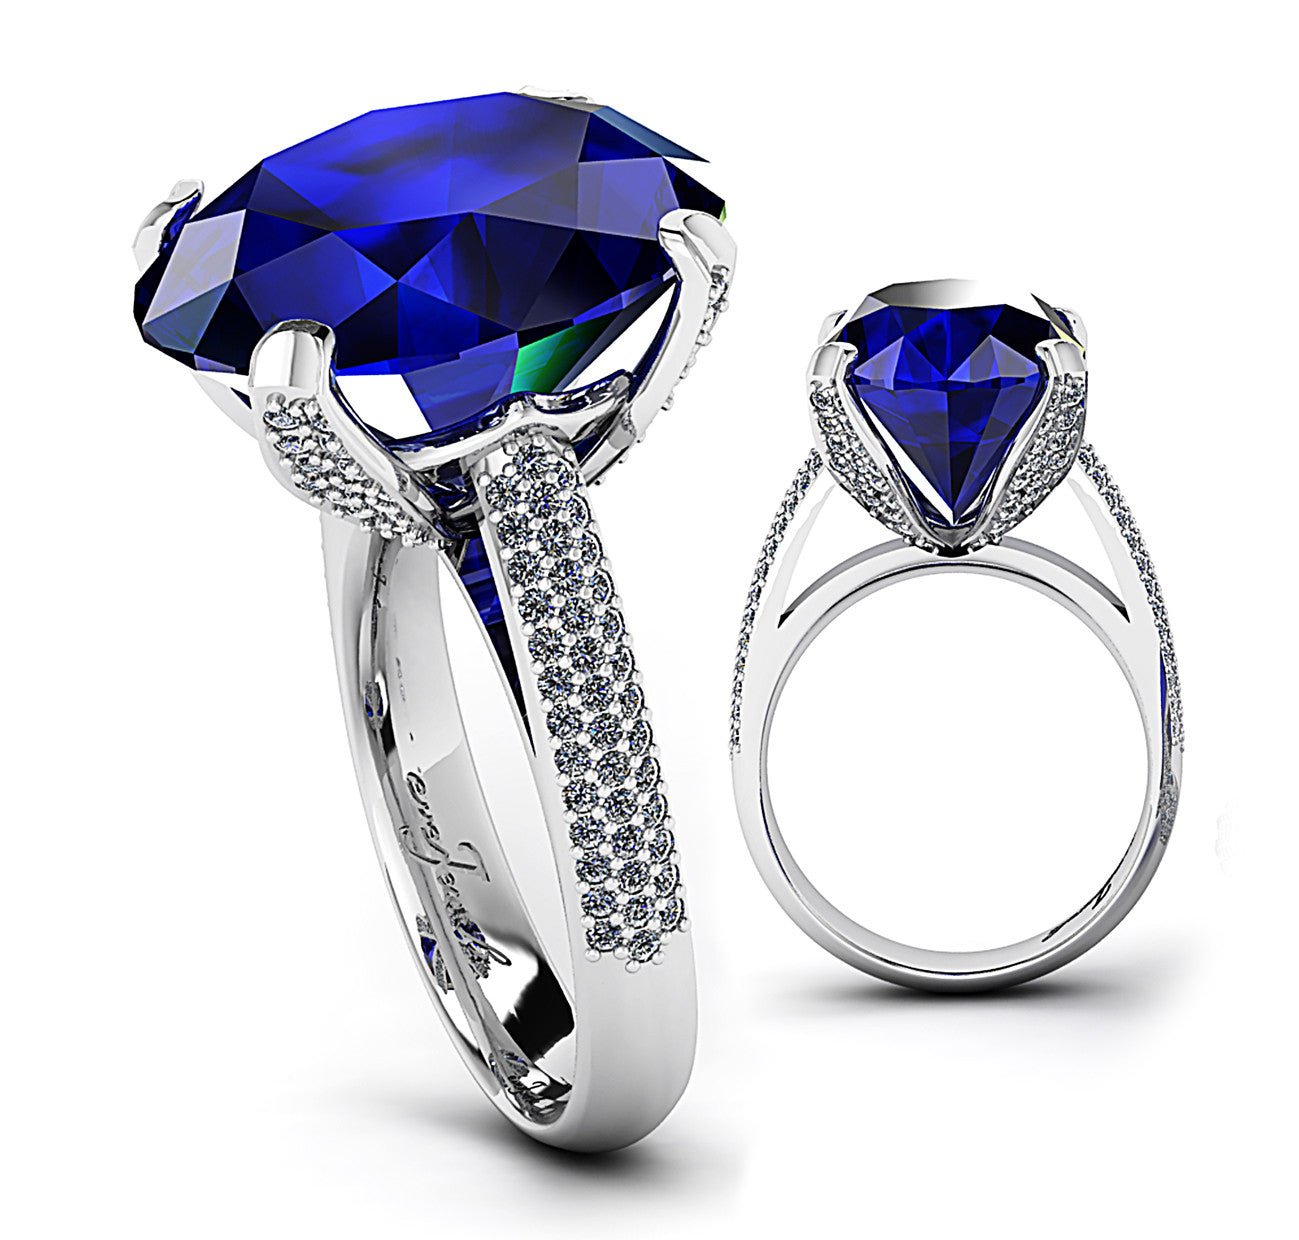 18ct White gold 15ct oval tanzanite dress ring claw set with pave diamonds - ForeverJewels Design Studio 8